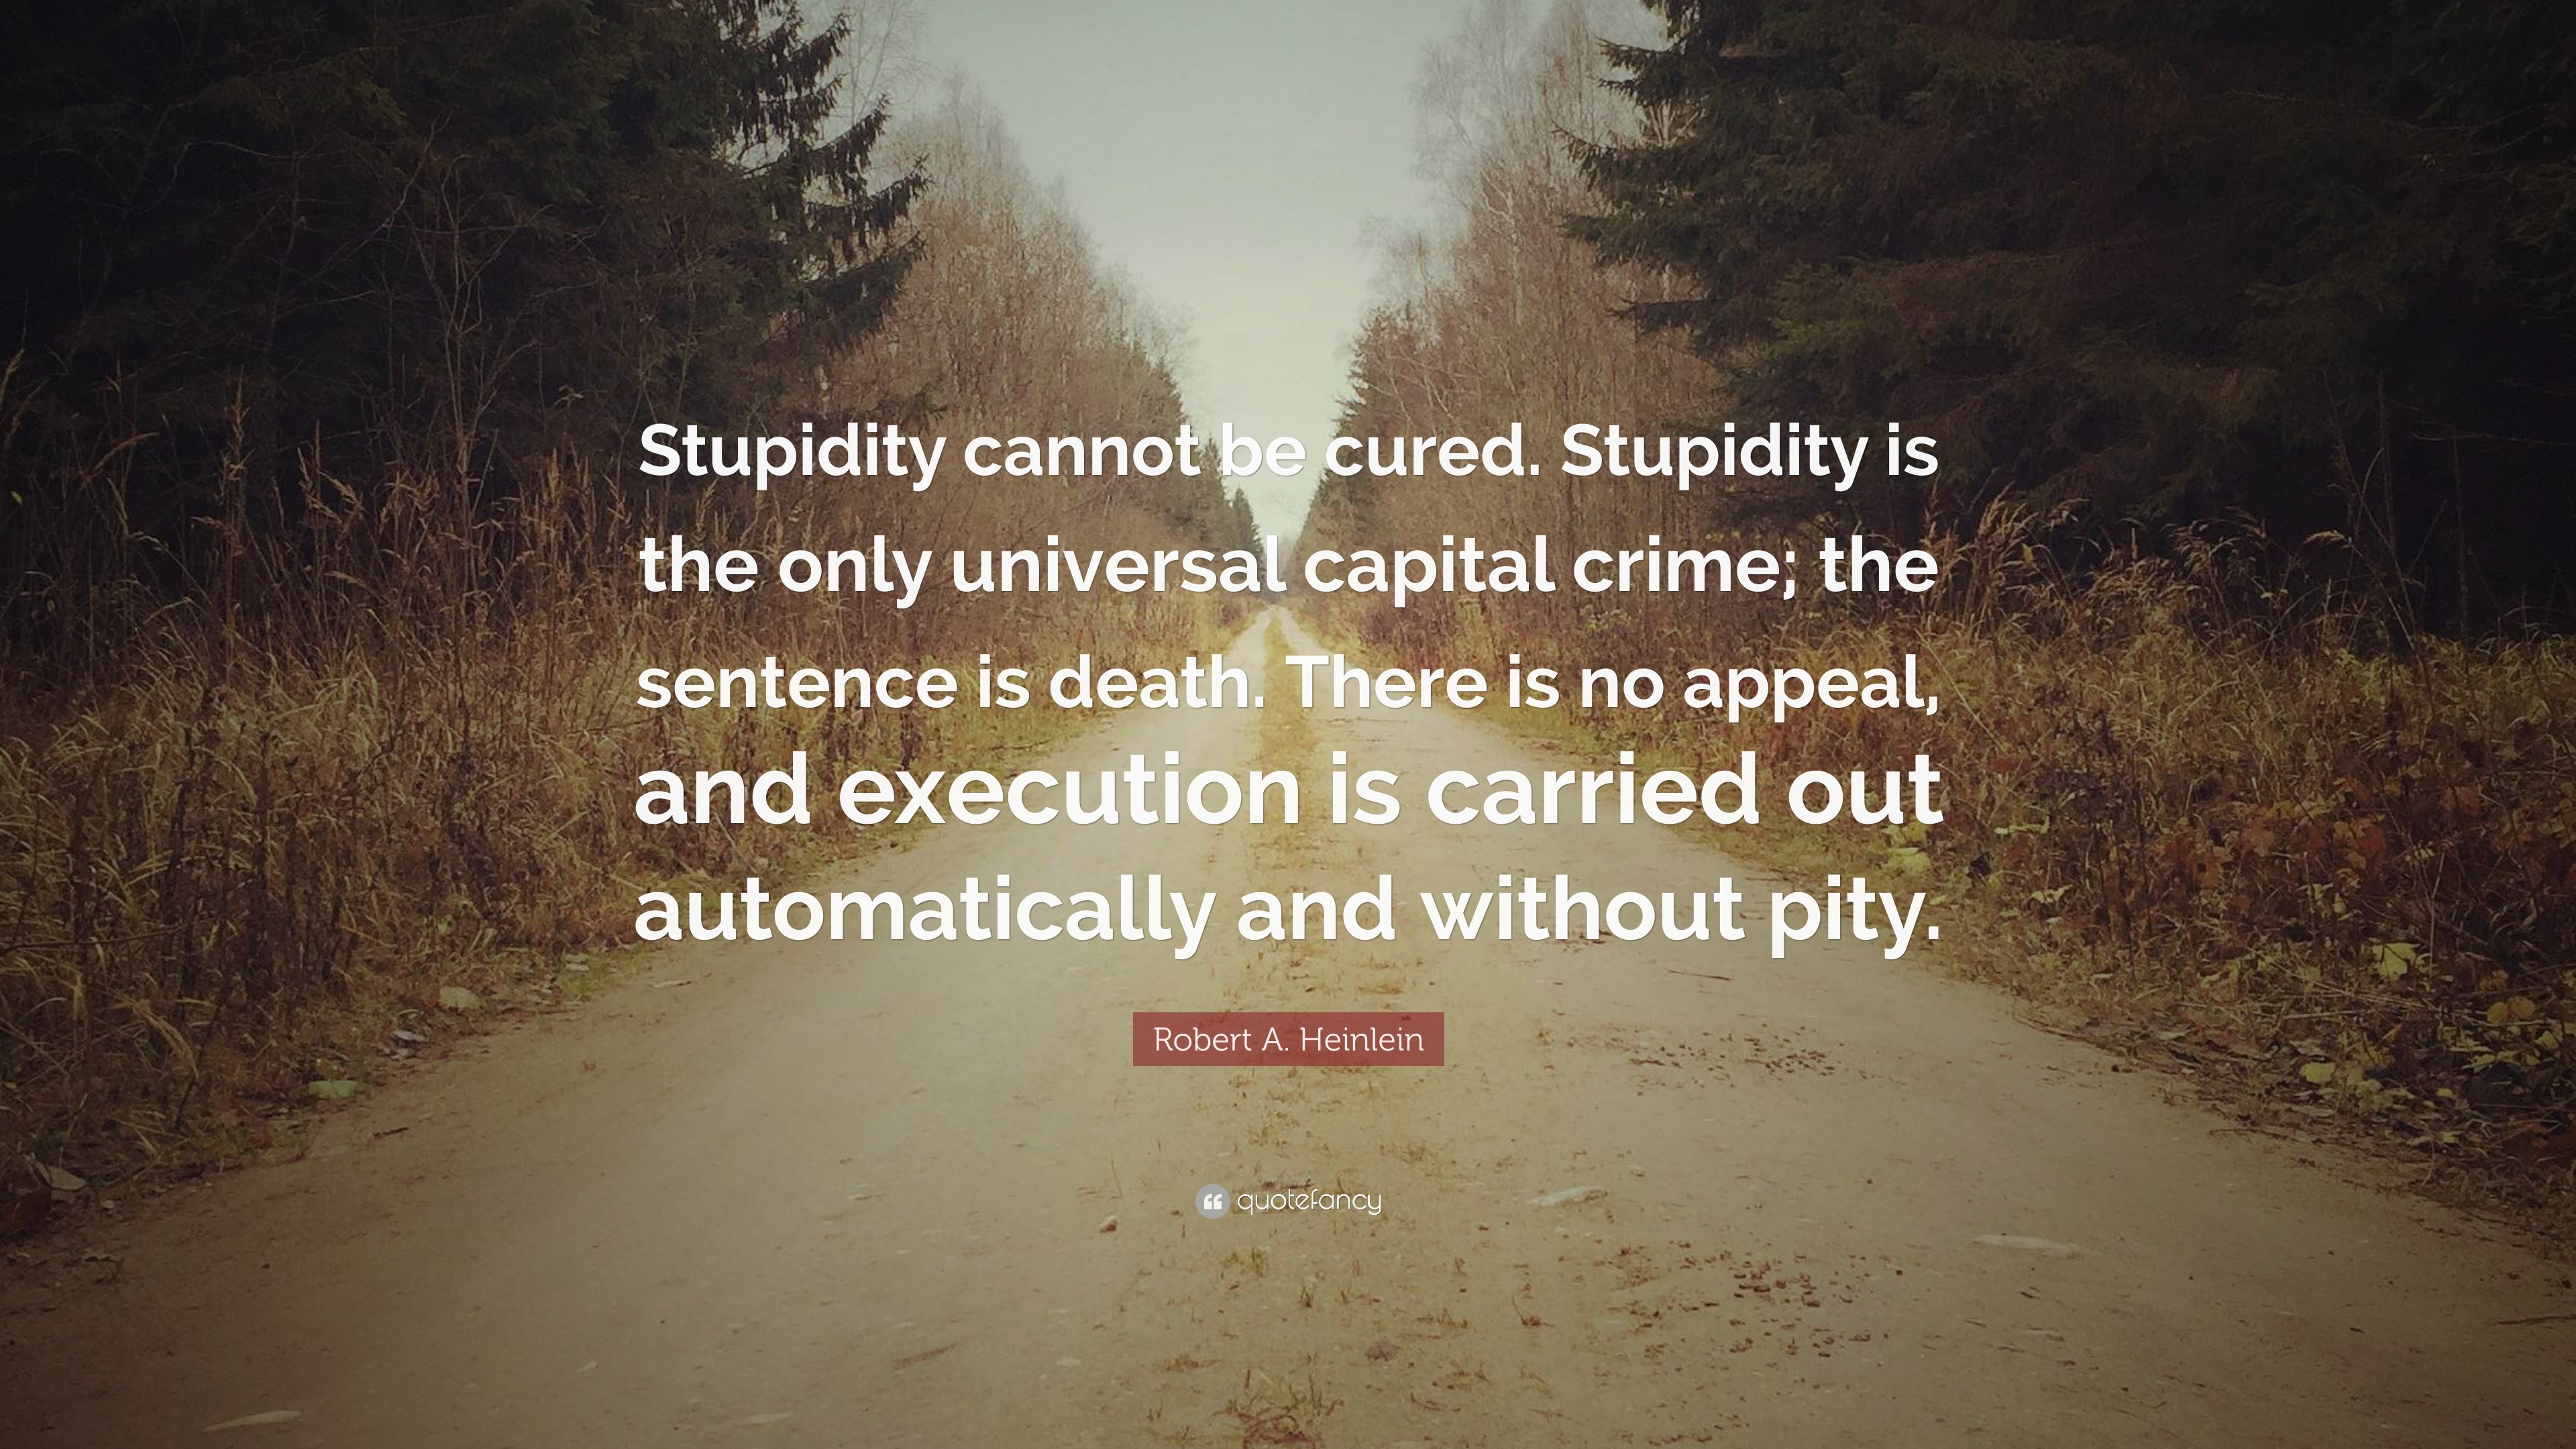 Robert A Heinlein Quote Stupidity Cannot Be Cured Stupidity Is The Only Universal Capital Crime The Sentence Is Death There Is No Appeal And